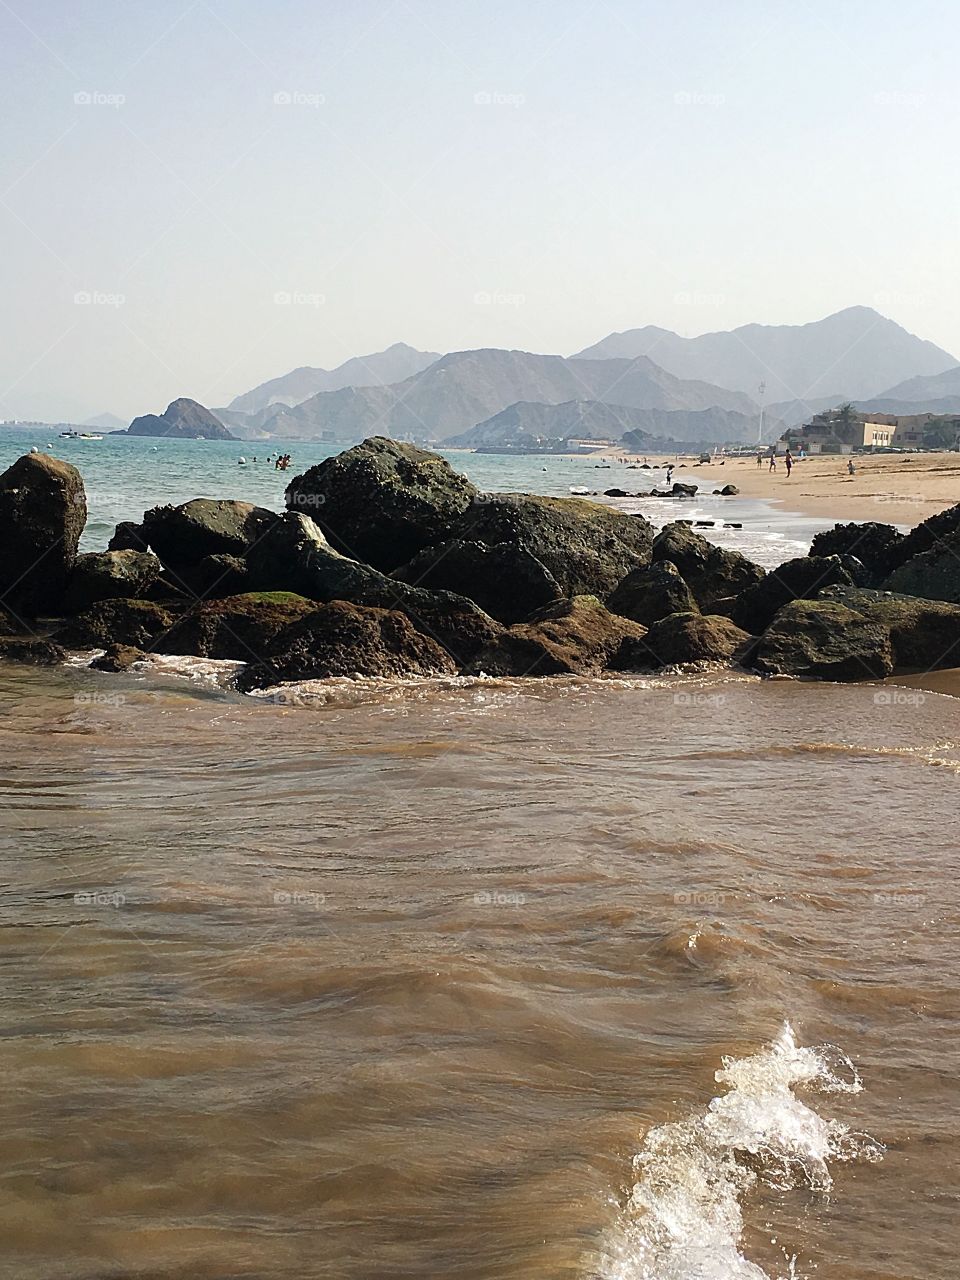 Beach and mountains on Indian coastline 